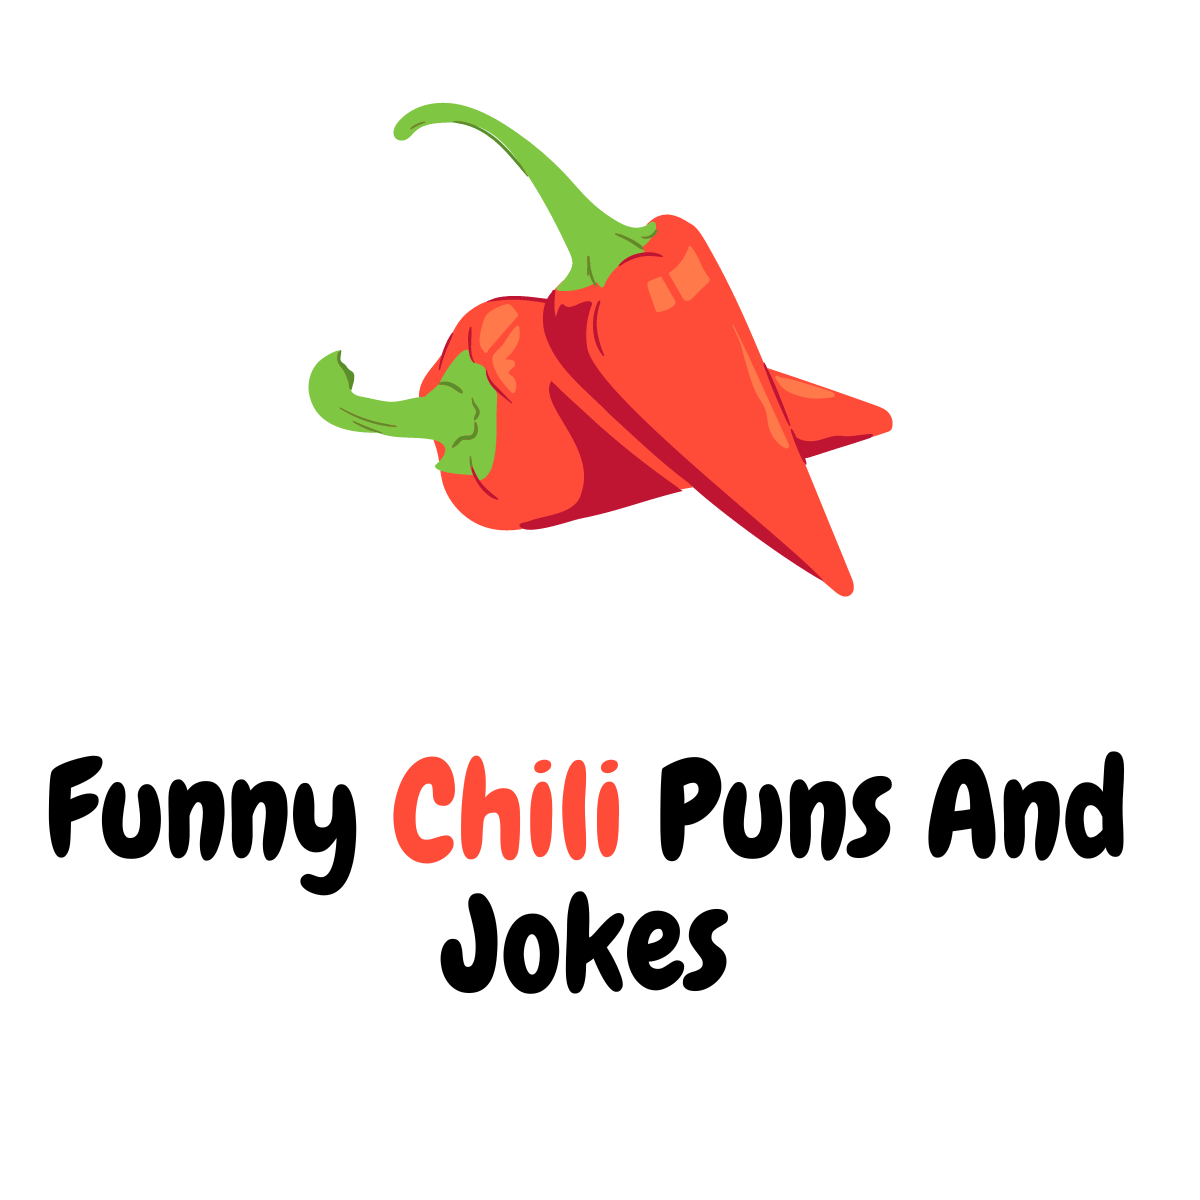 120+ Funny Chili Puns And Jokes: Hot and Hilarious - Funniest Puns